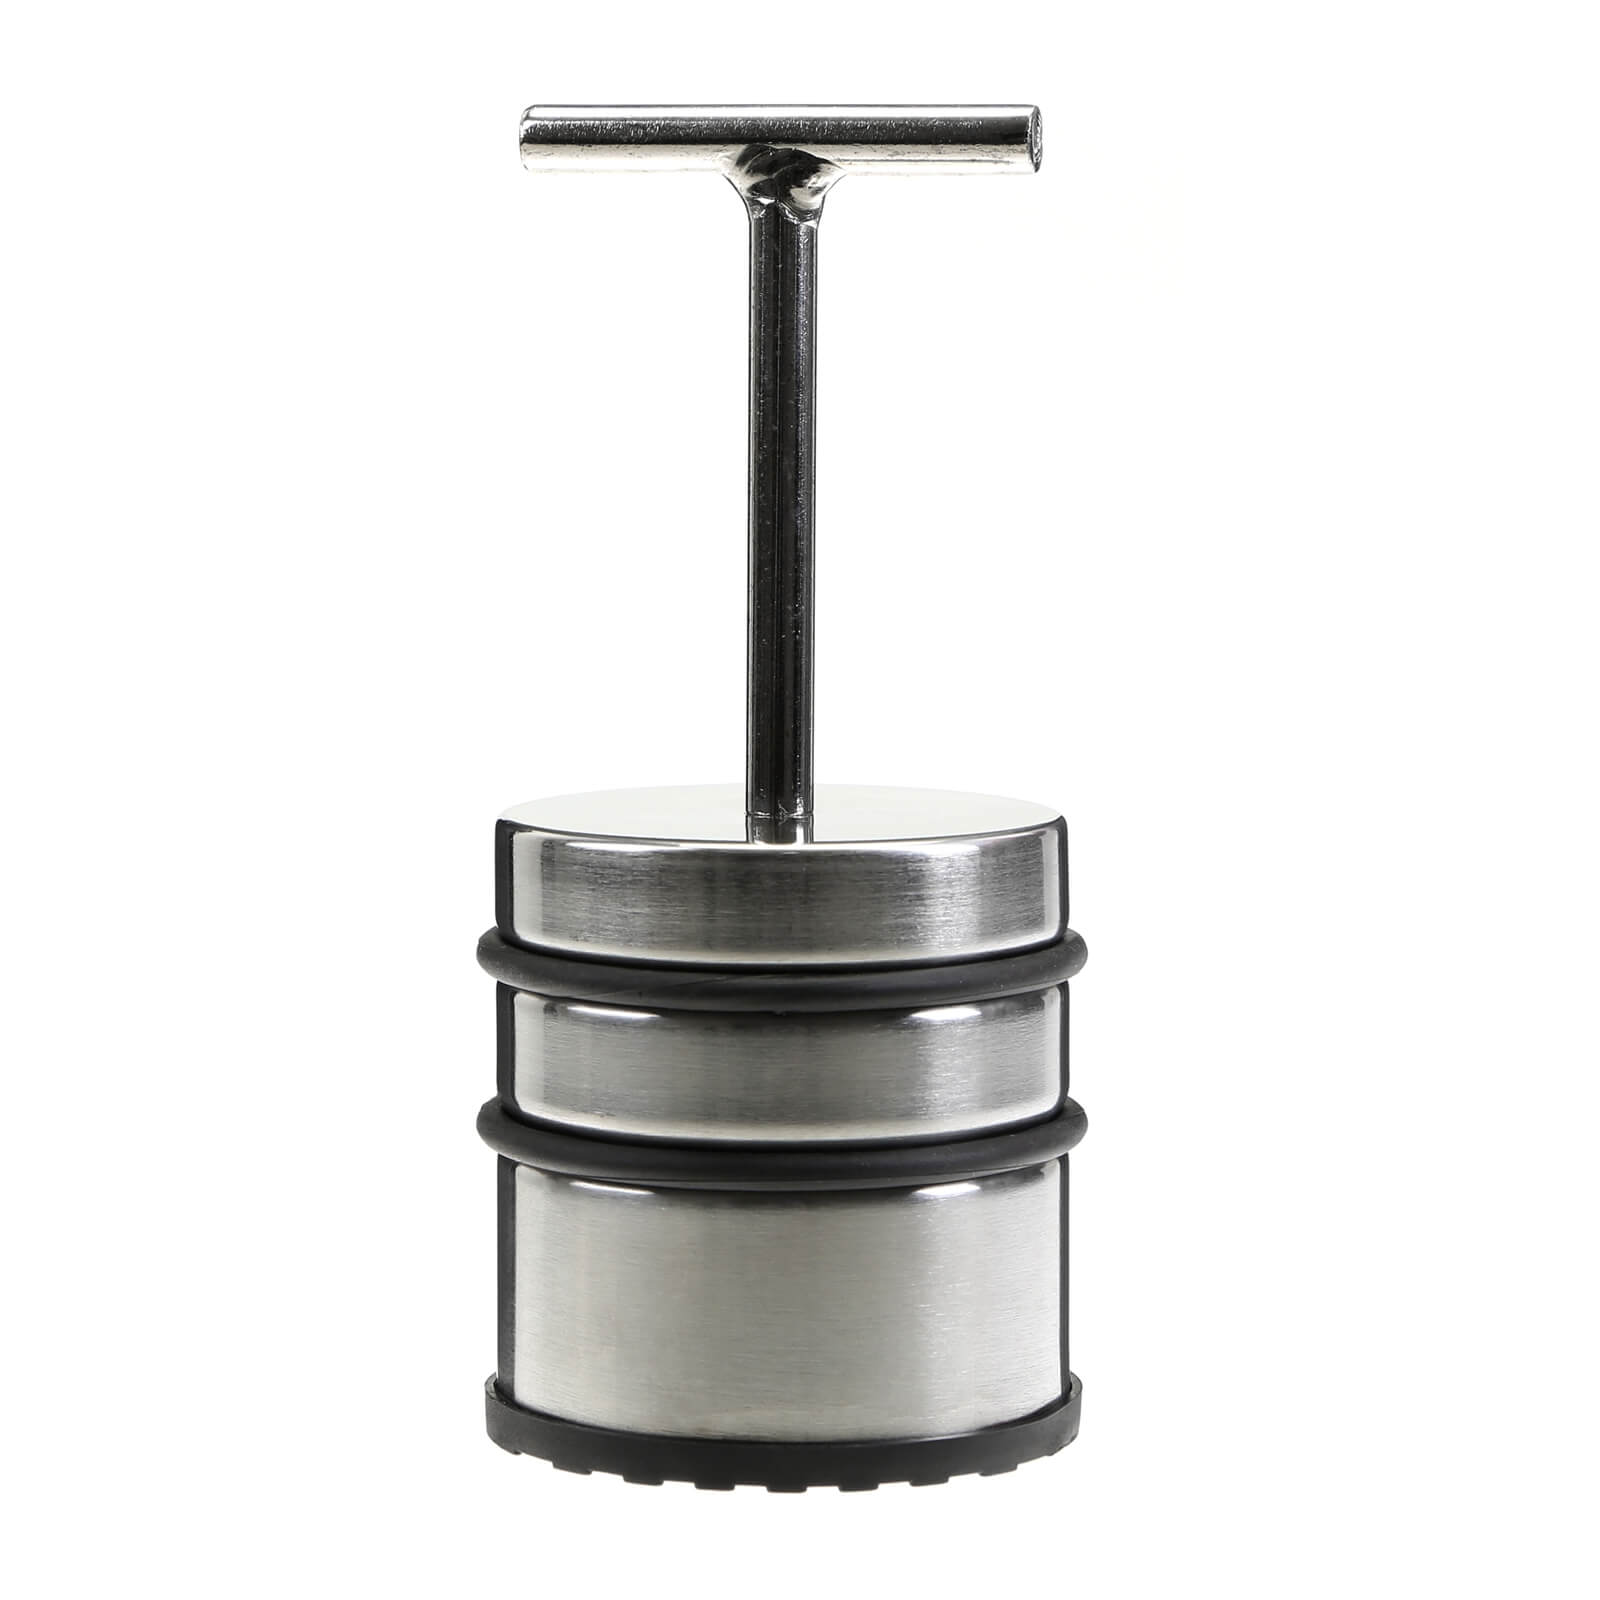 Photo of Chrome Door Stopper With Handle